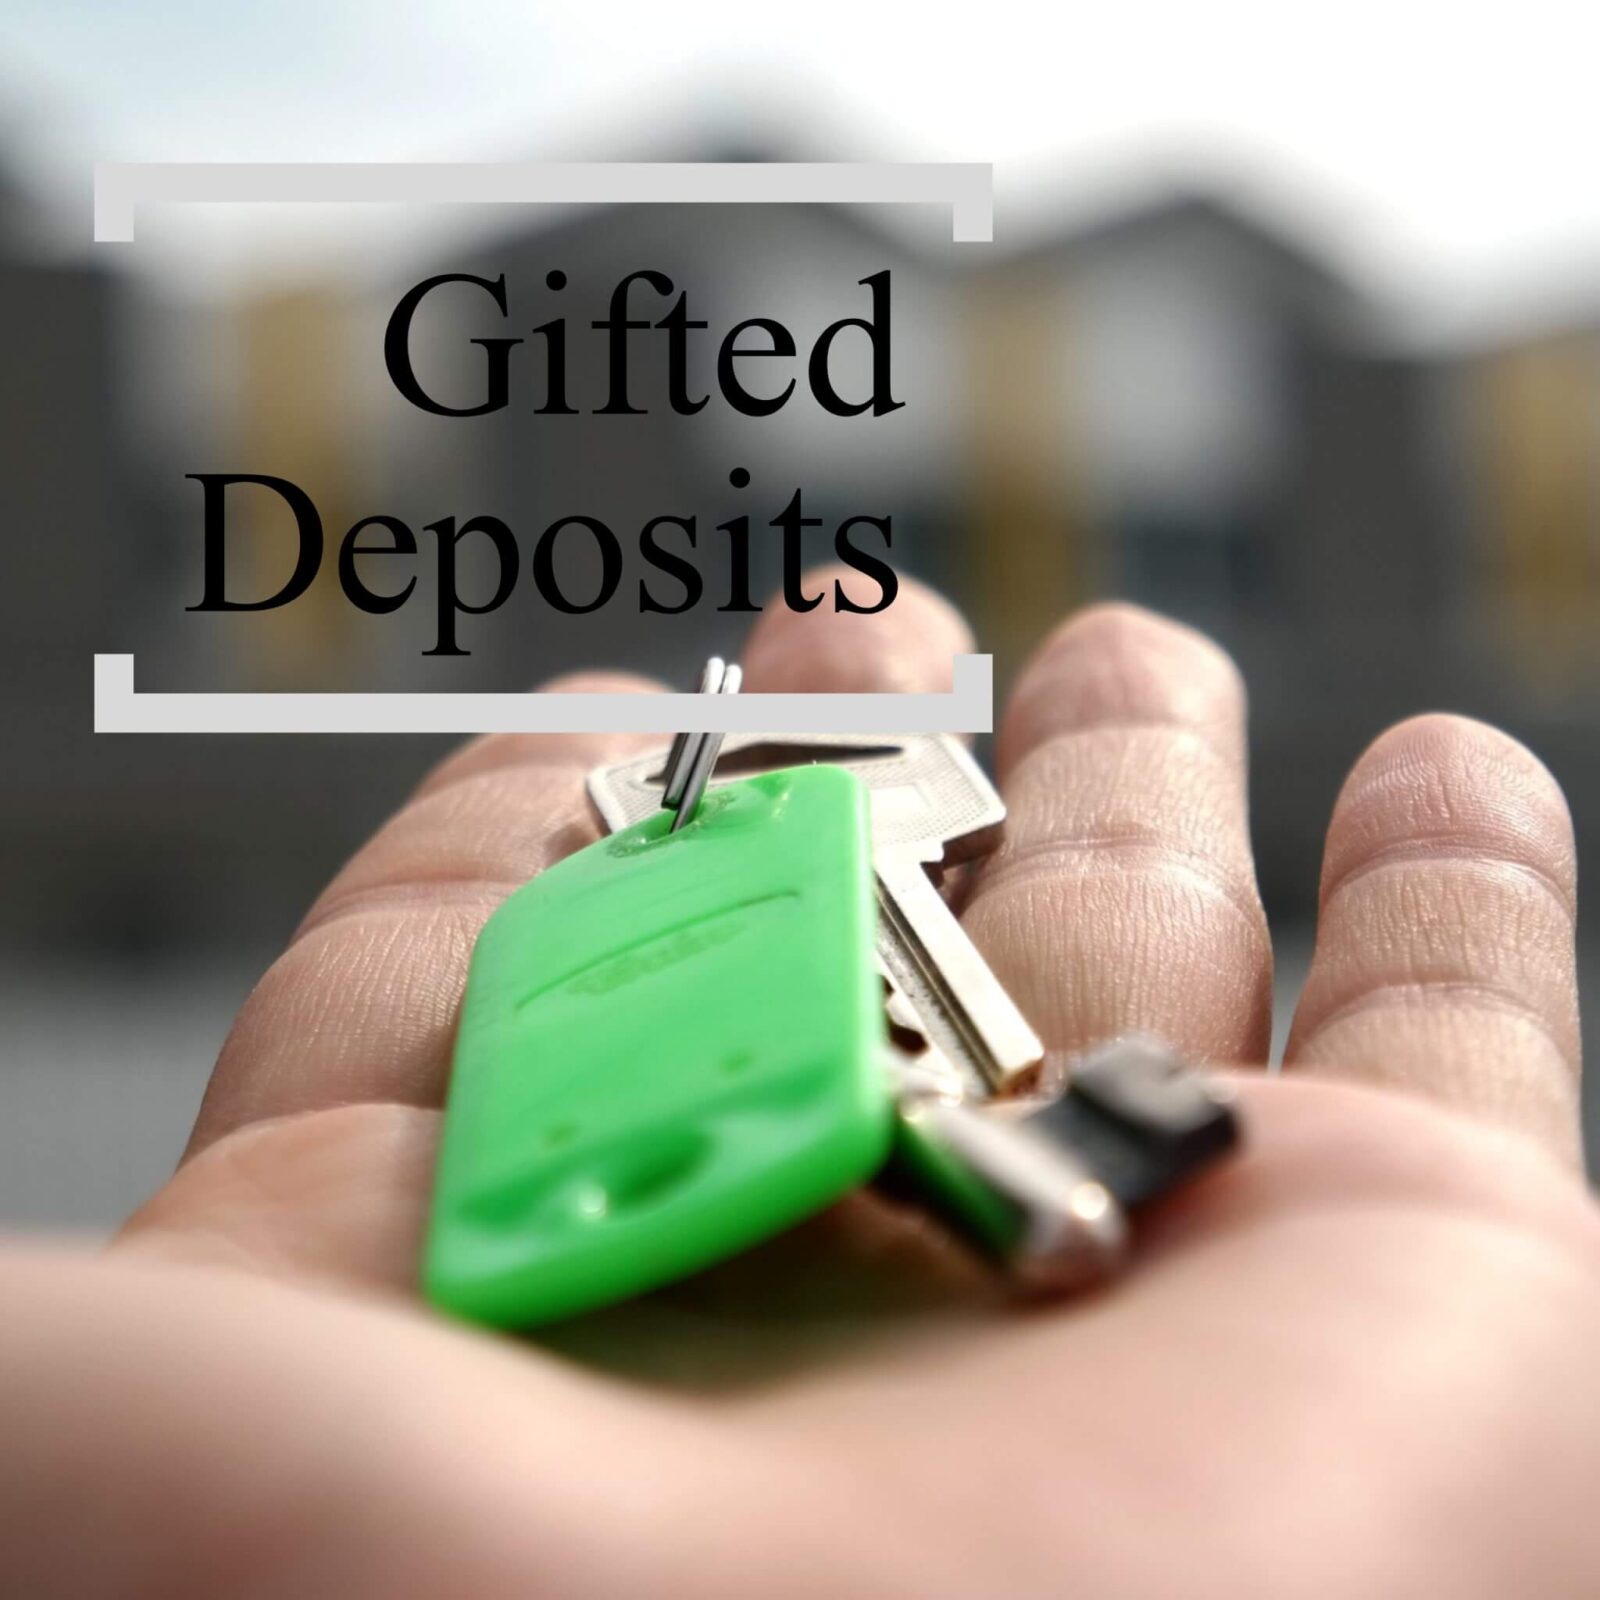 gifted deposits